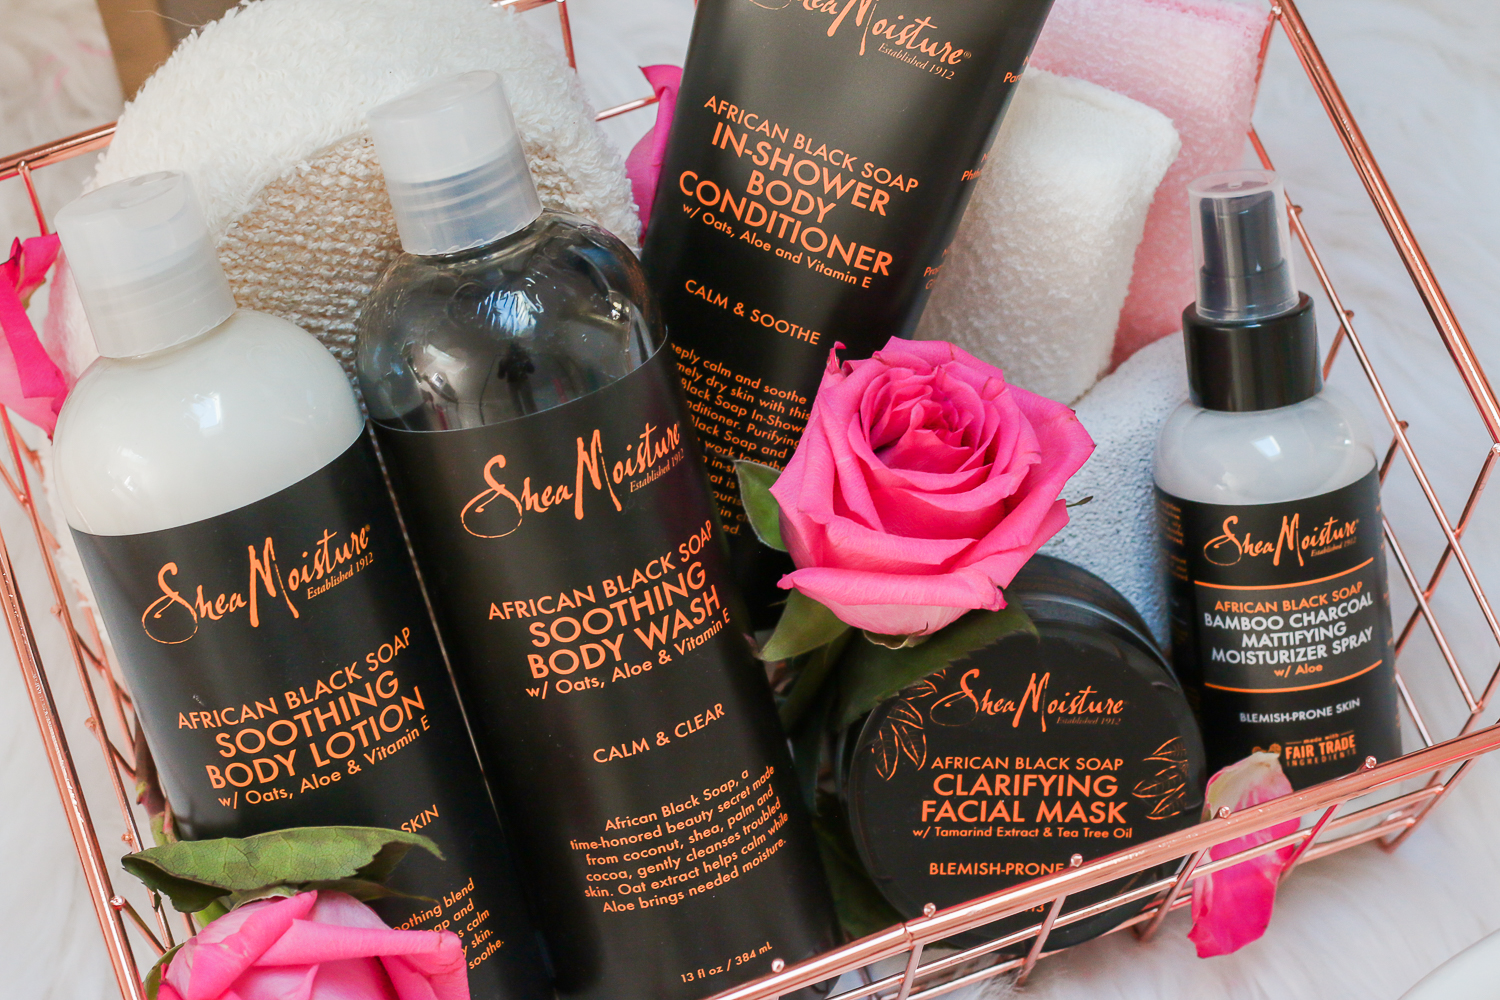 How to Give Yourself a Soothing Spa Experience at Home with the SheaMoisture African Black Soap Line by beauty blogger Stephanie Ziajka from Diary of a Debutante, At Home Spa Day Essentials from Walmart, Winter Skincare Tips for Oily Skin, Body Skincare Routine, Skin Care Products for Oily Skin in Winter, At Home Spay Day Kit, DIY Spa Day at Home